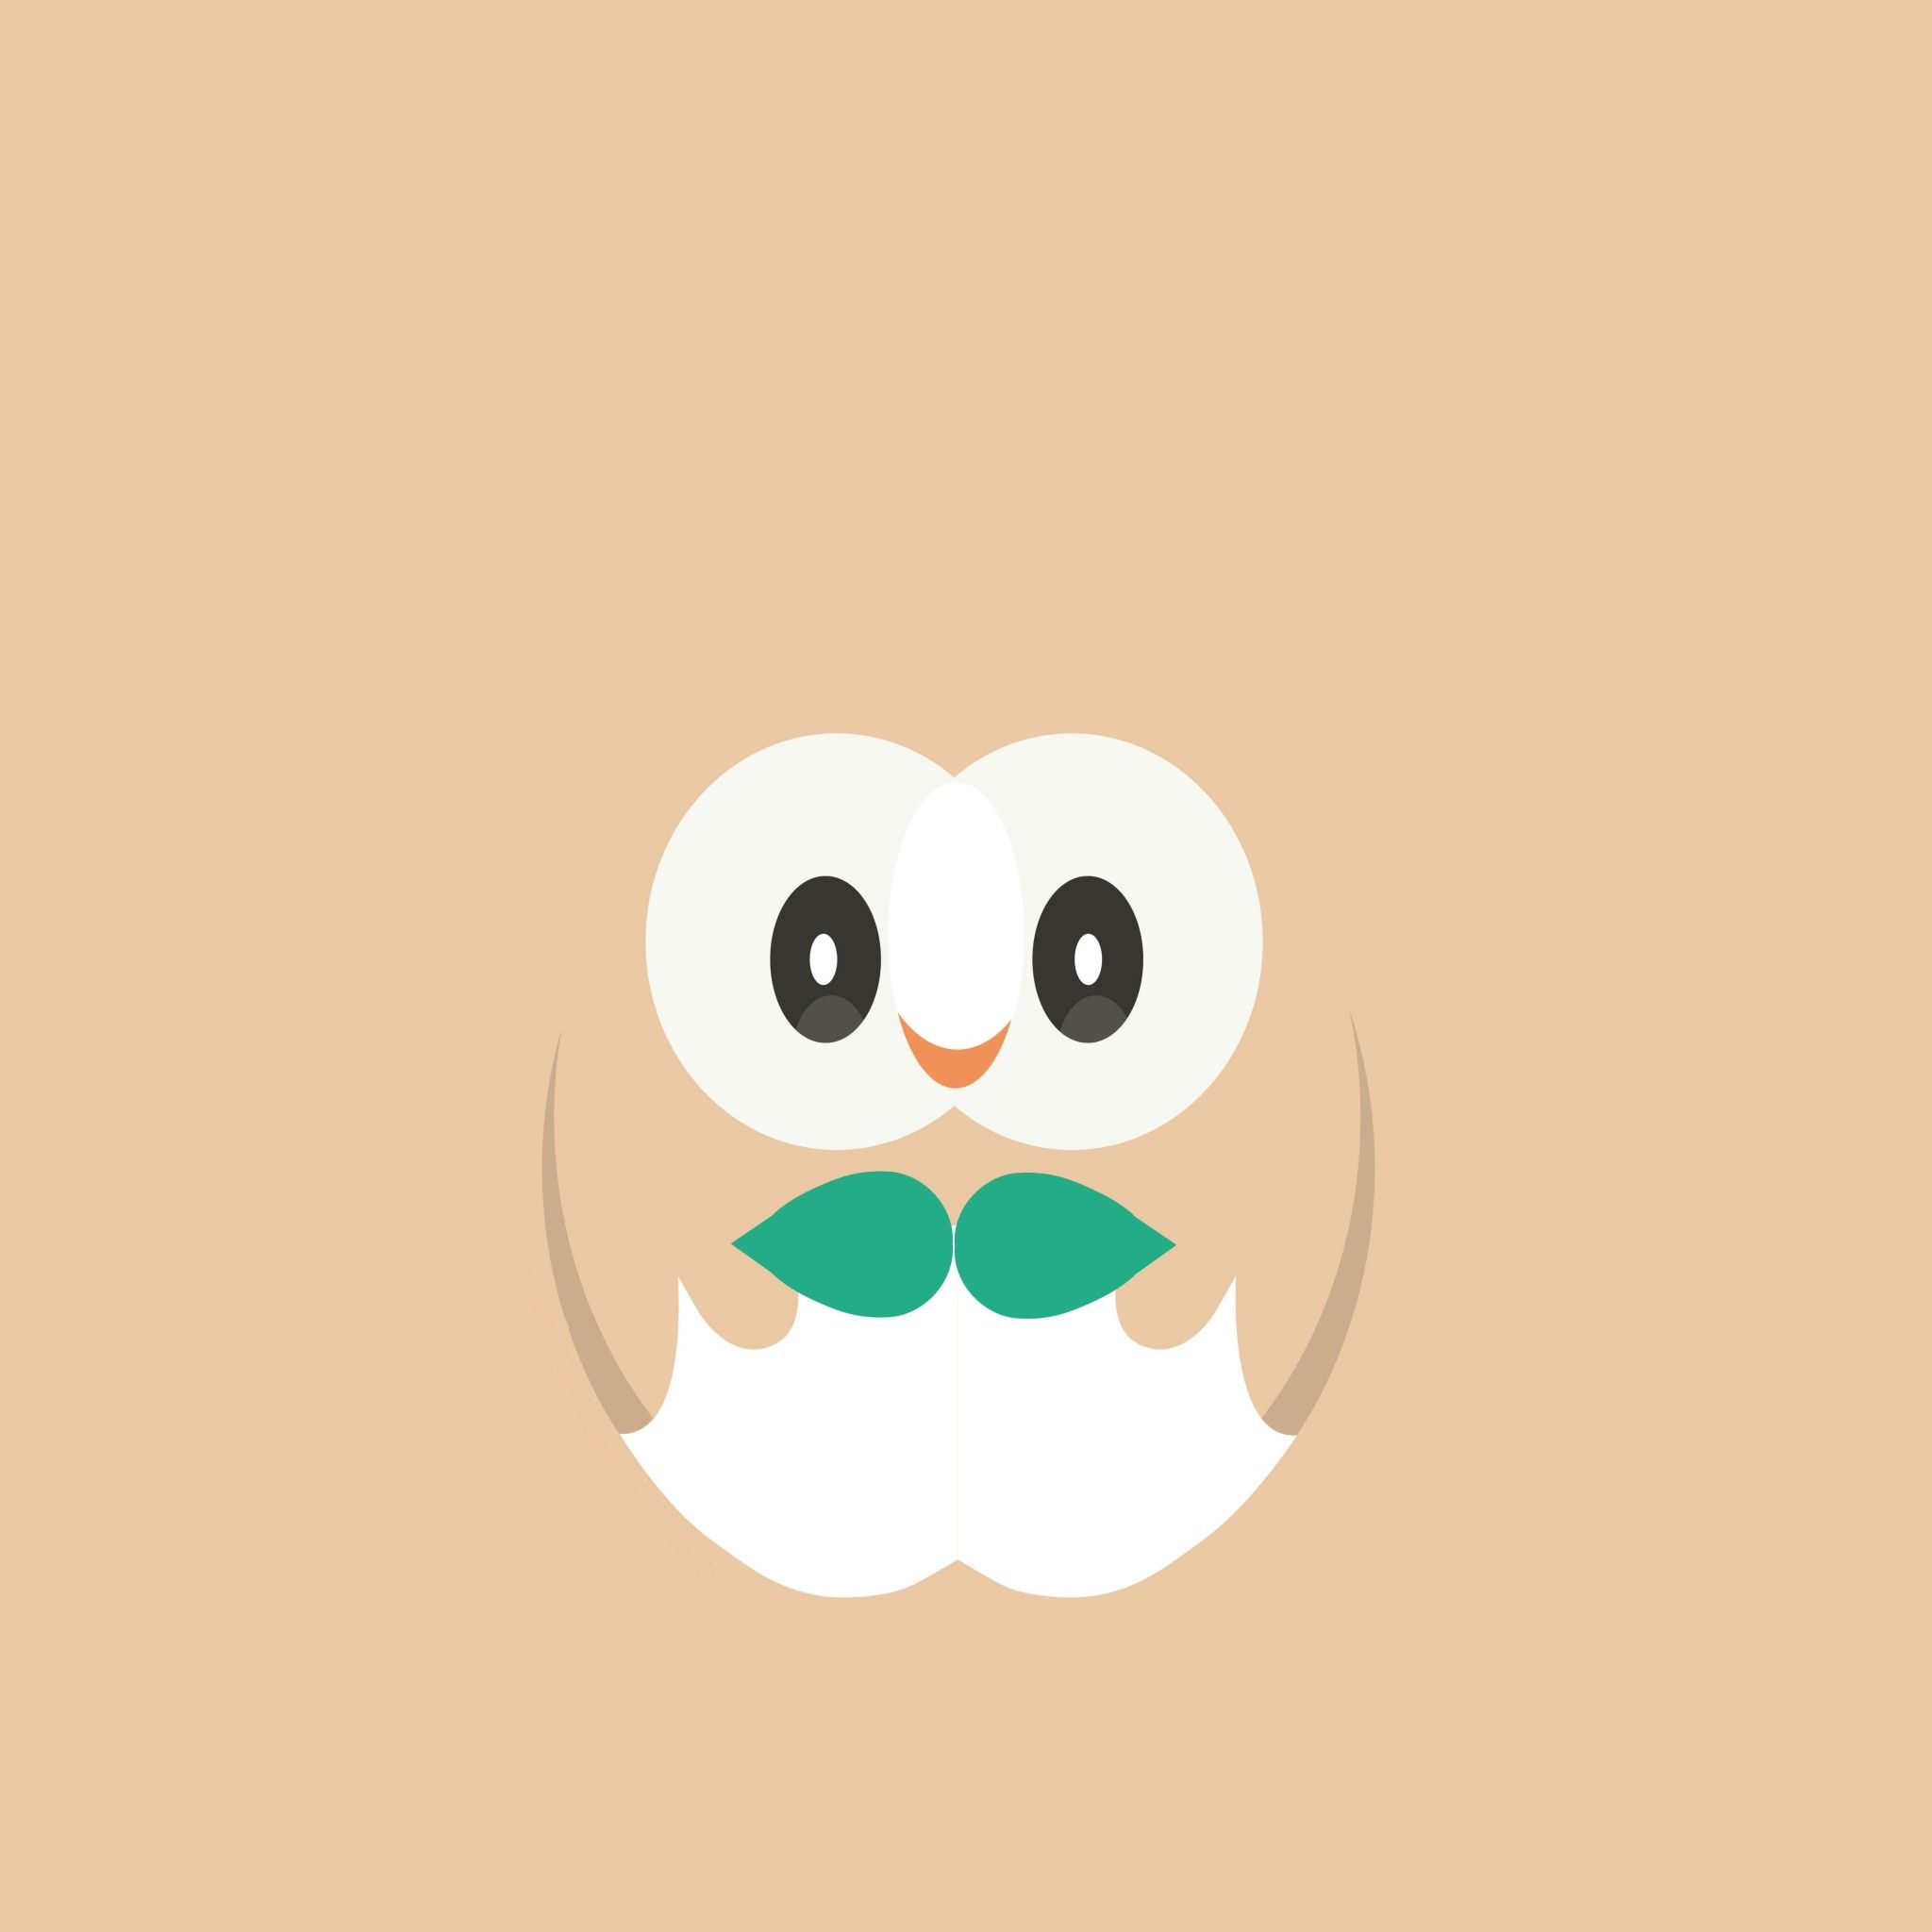 Rowlet Pokemon Tap To See More Of The Cutest Art